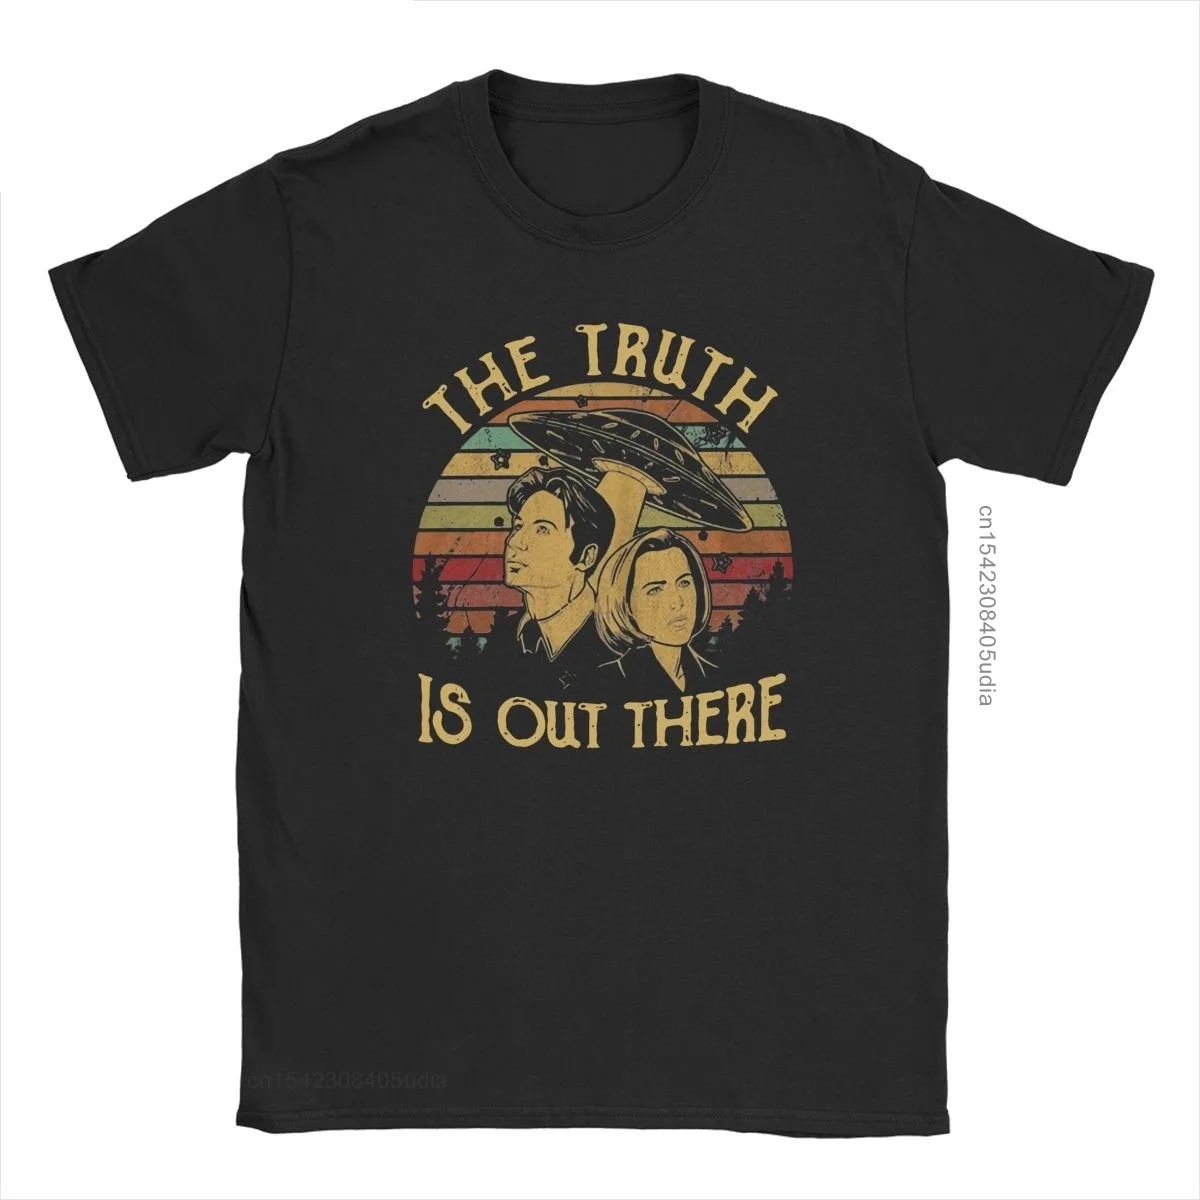 The X Files The Truth Is Out There Tshirt For Men Awesome Cotton Tee Shirt for Men Vintage Oversized T Shirt